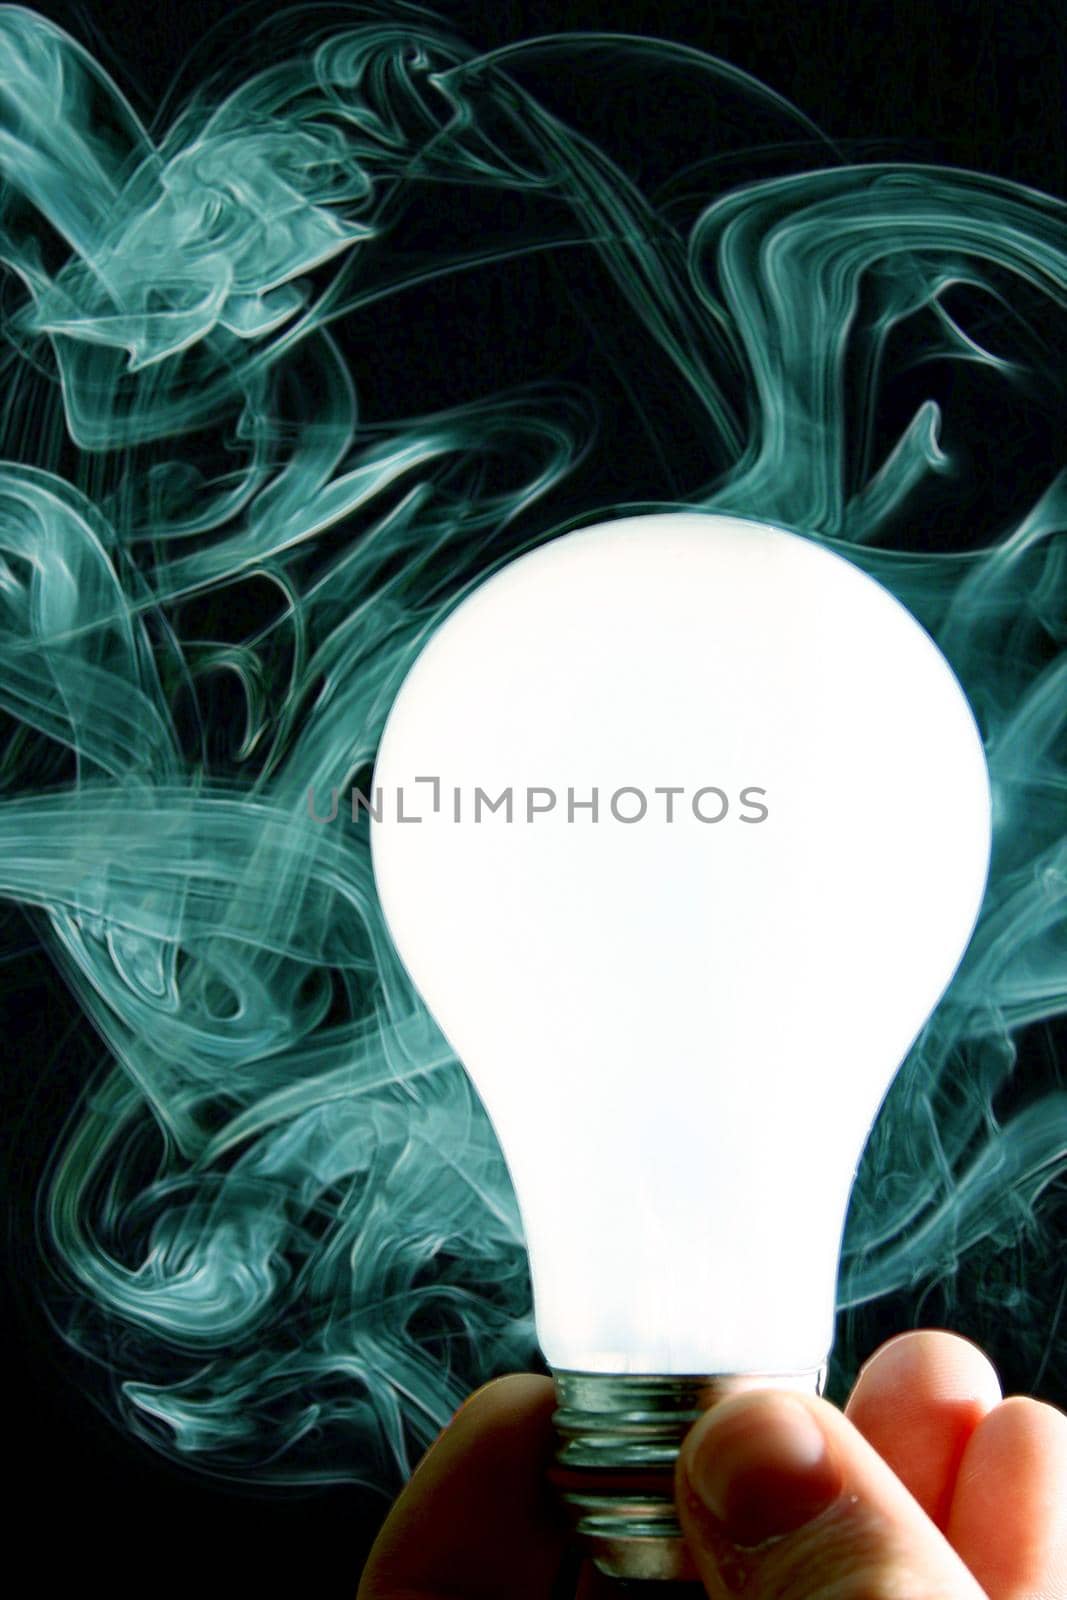 White lightbulb held by a human hand against a background of teal smoke and black by njproductions